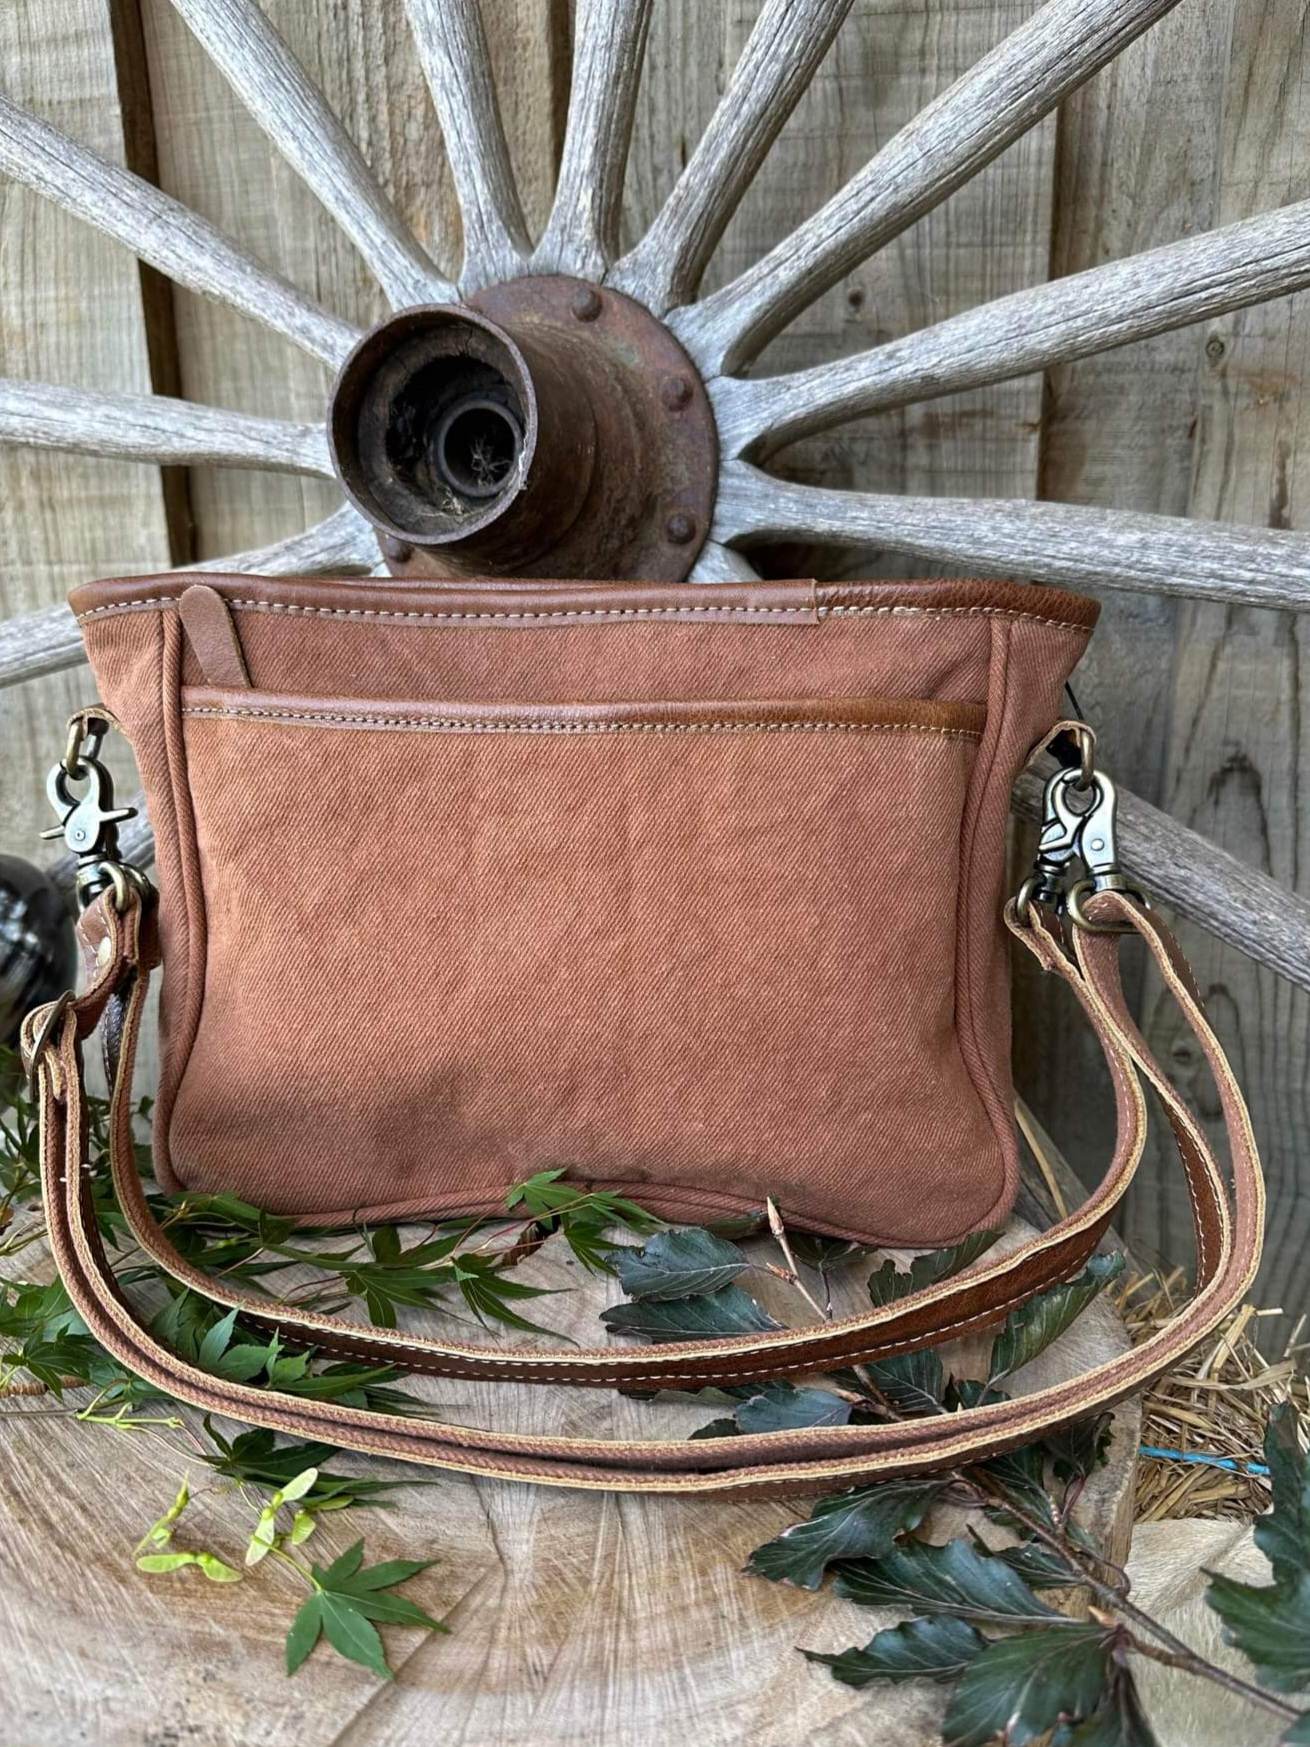 Western Recycled Canvas Embossed Leather Handbag